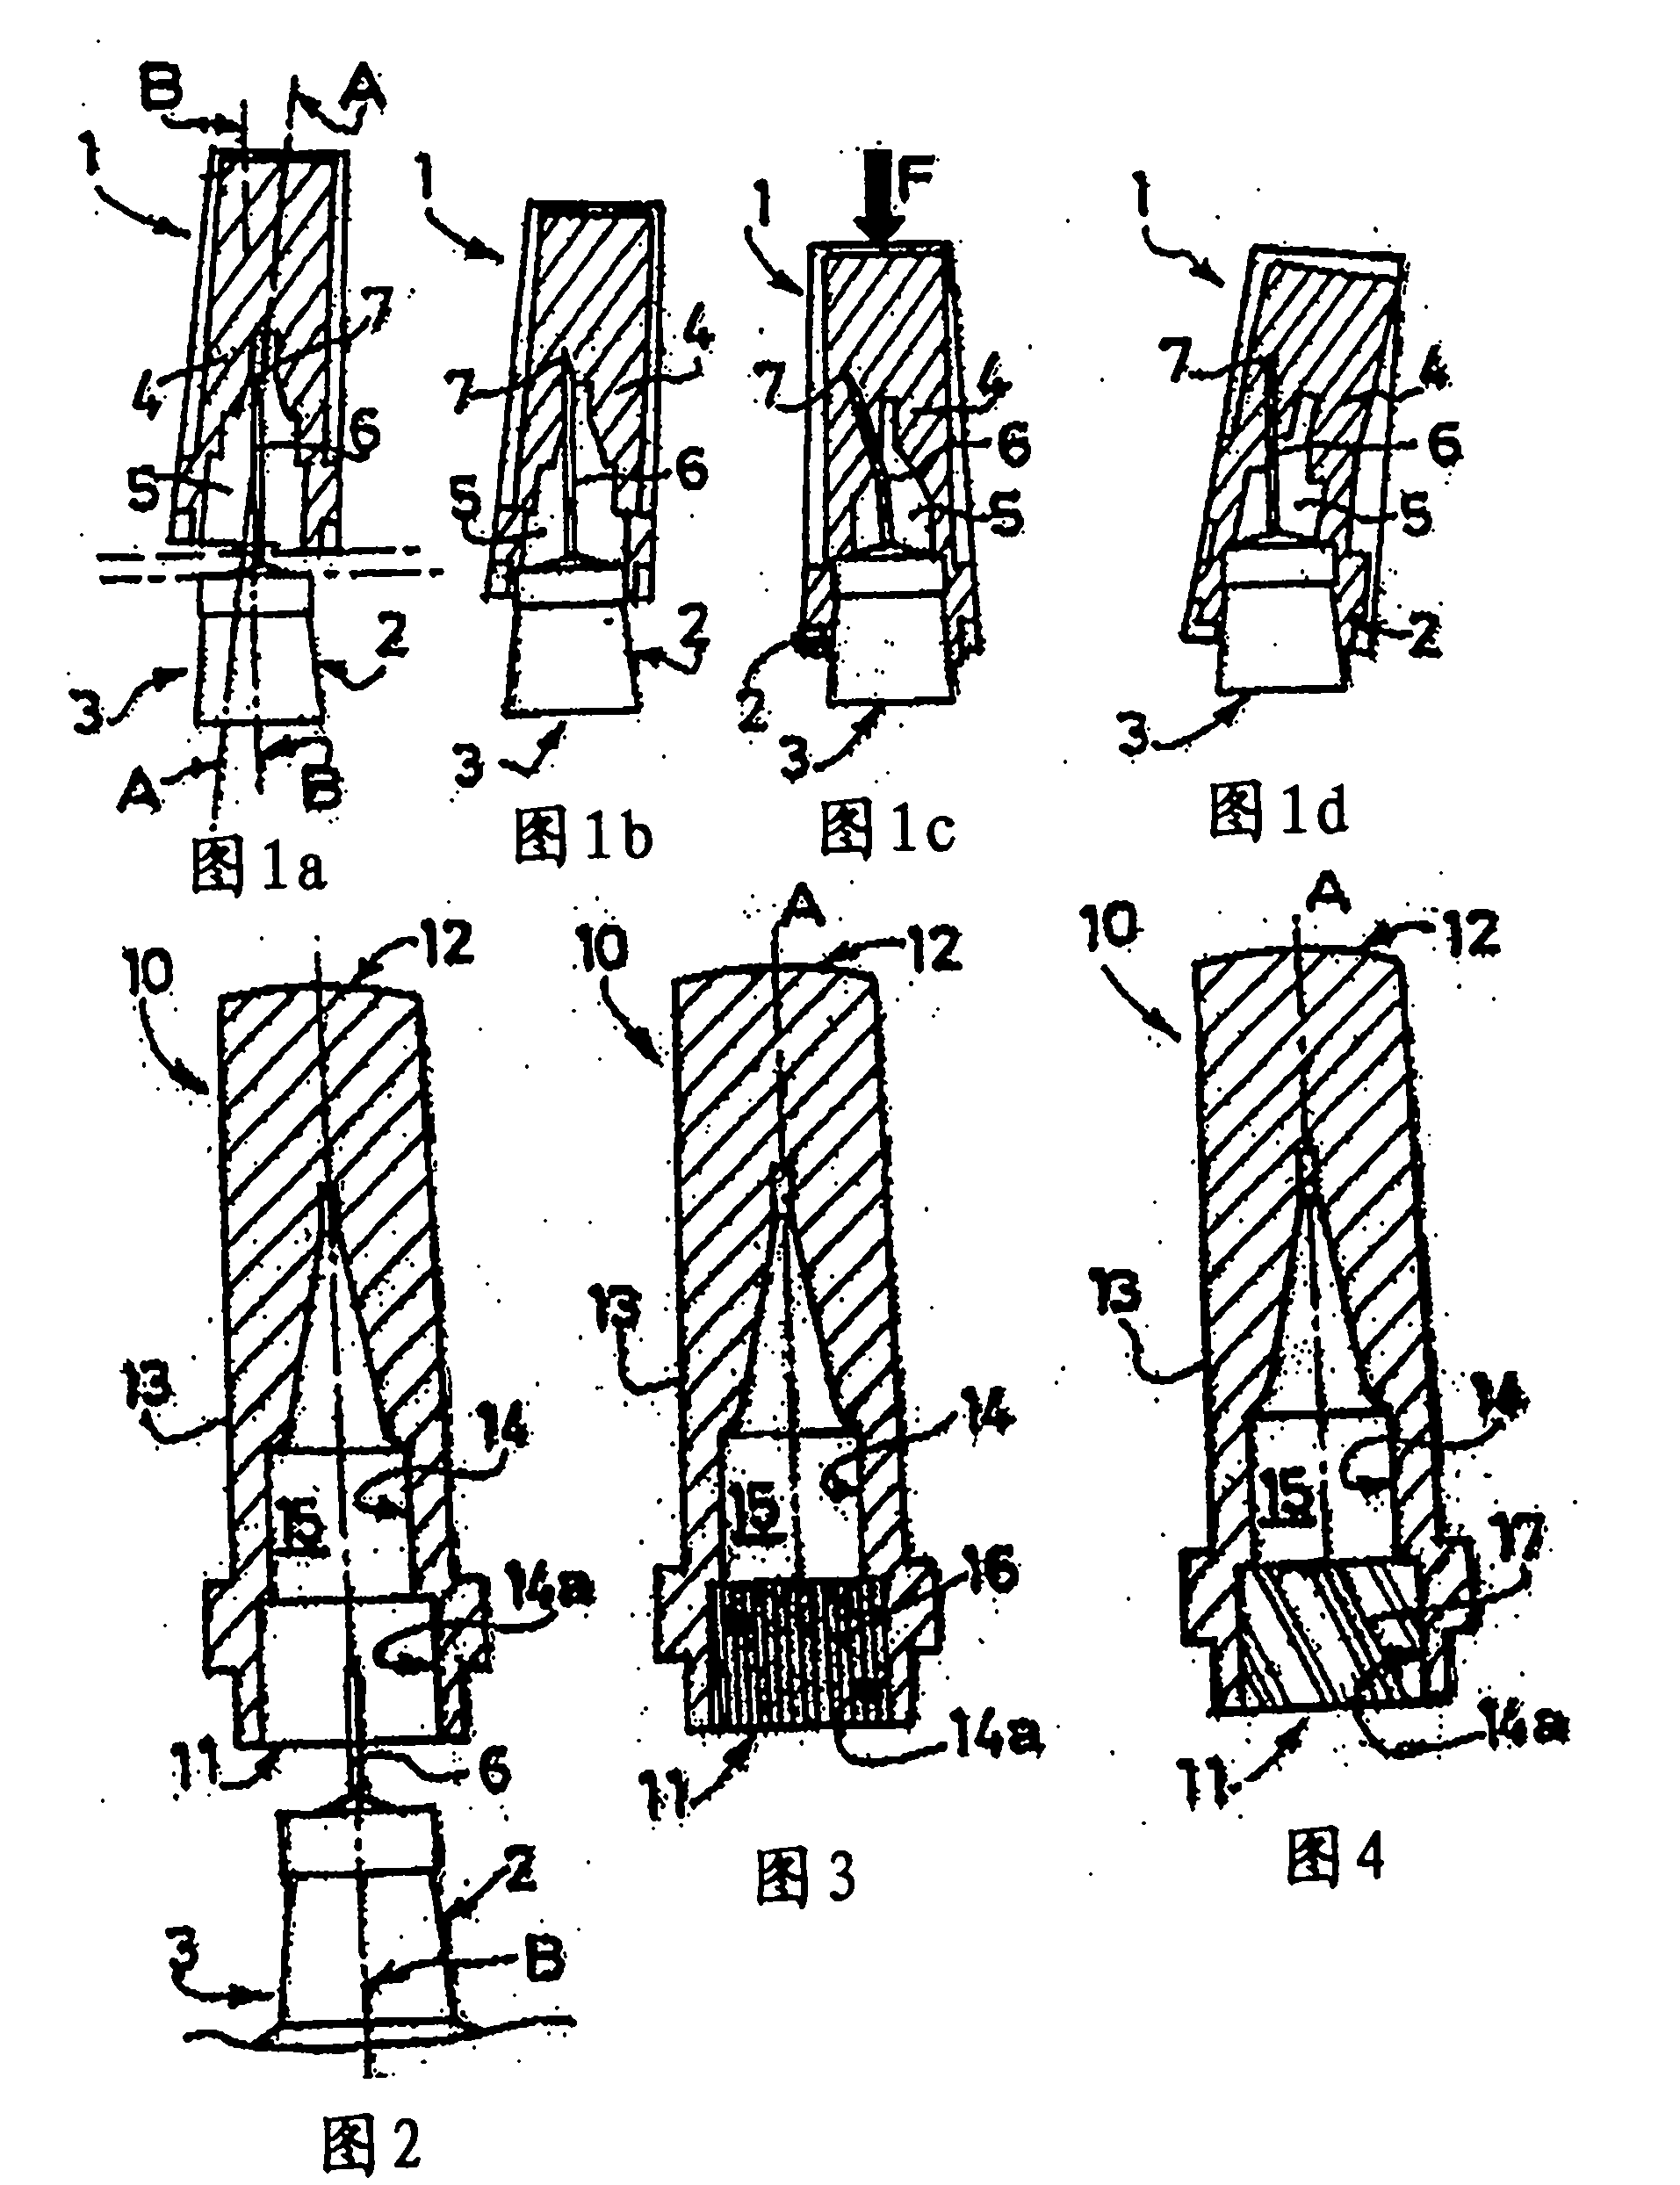 Needle shield with specific roughness